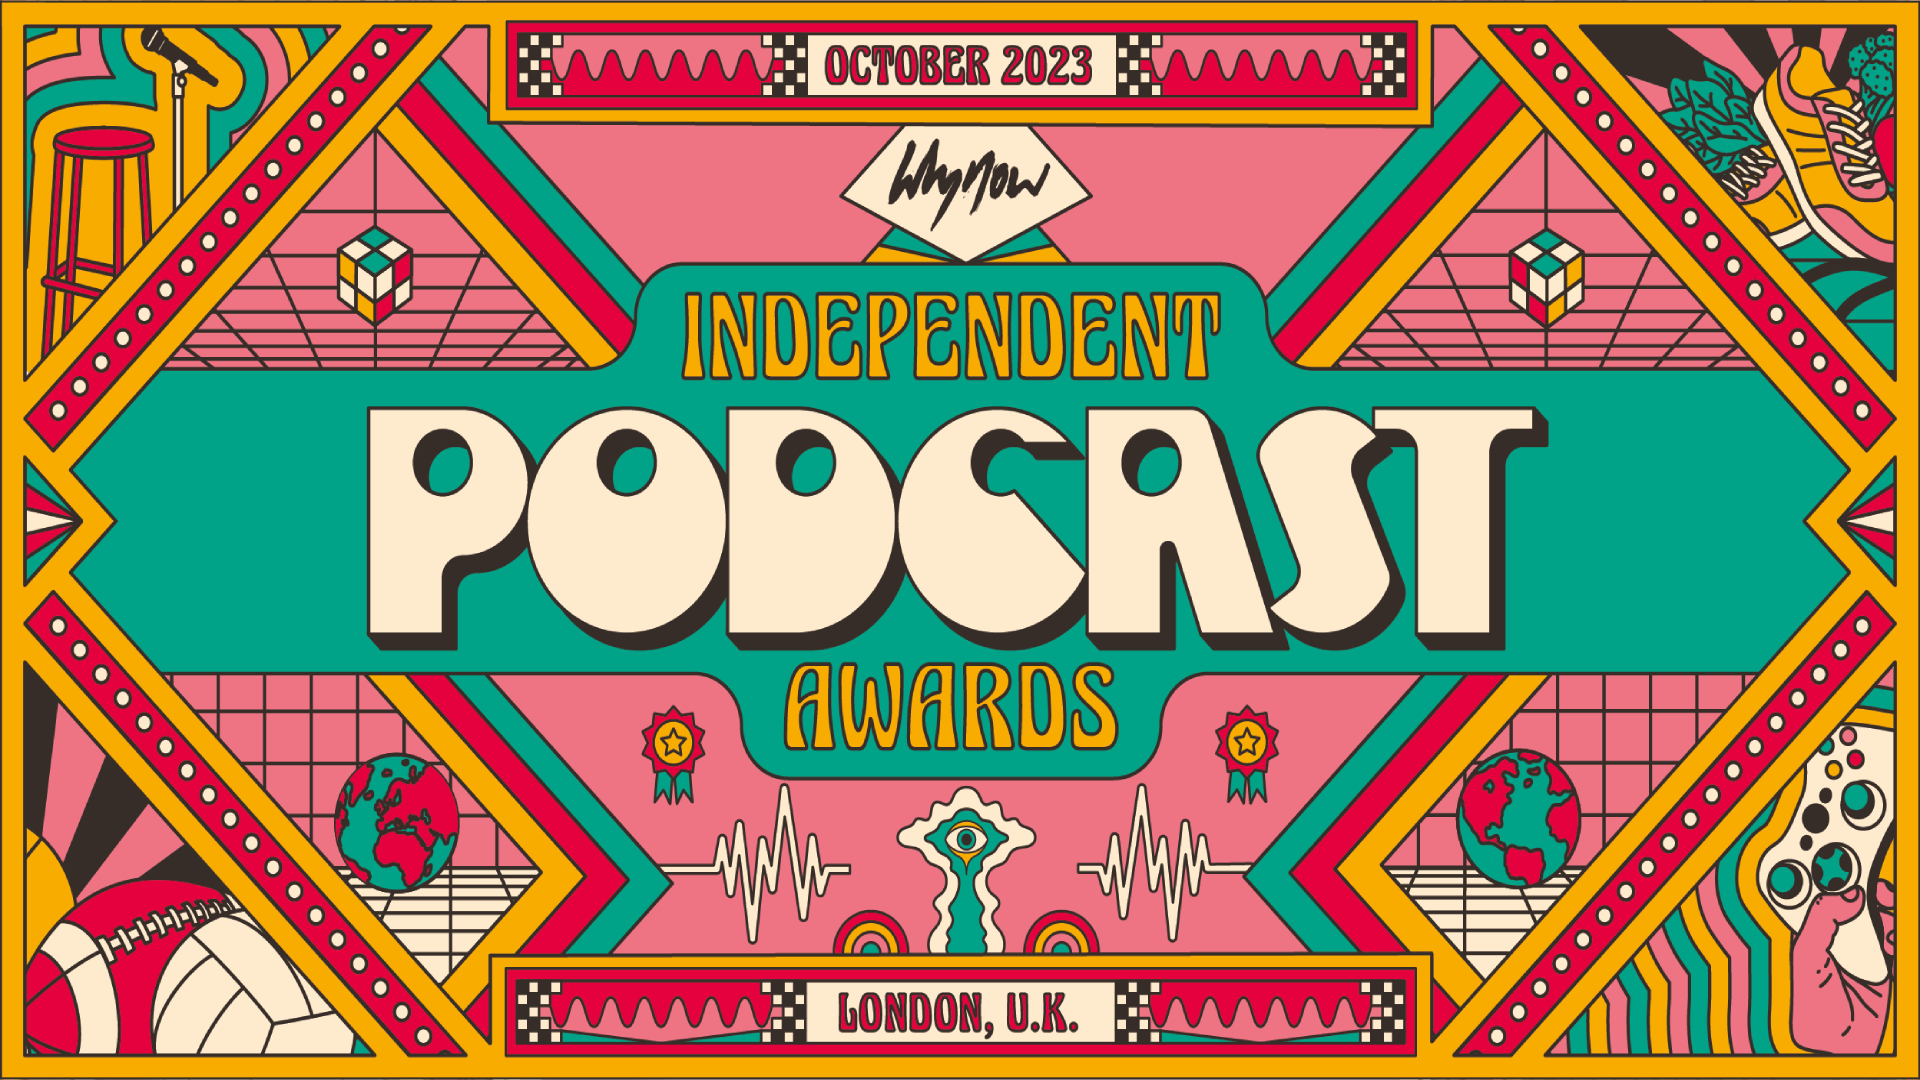 Independent Podcast Awards